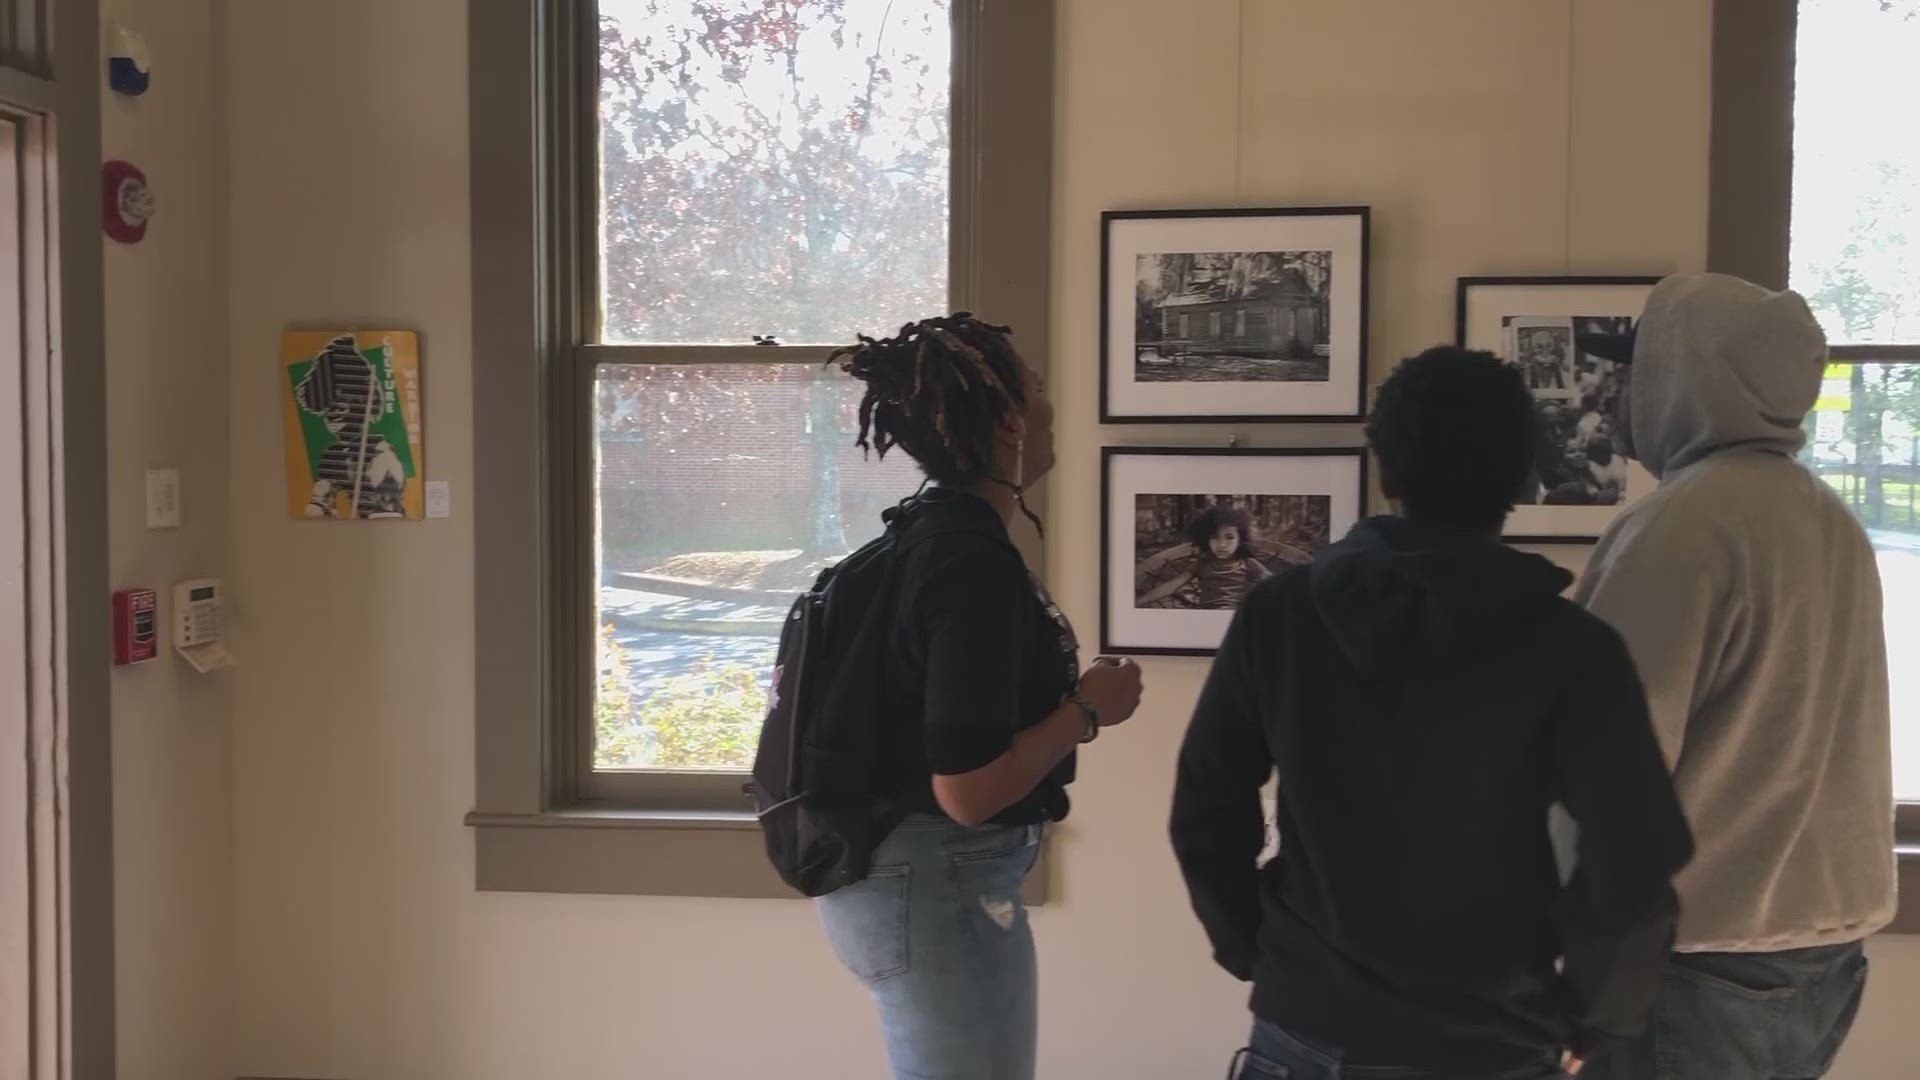 The Hapeville Arts Alliance rallied the community to present unique arts experience to the community